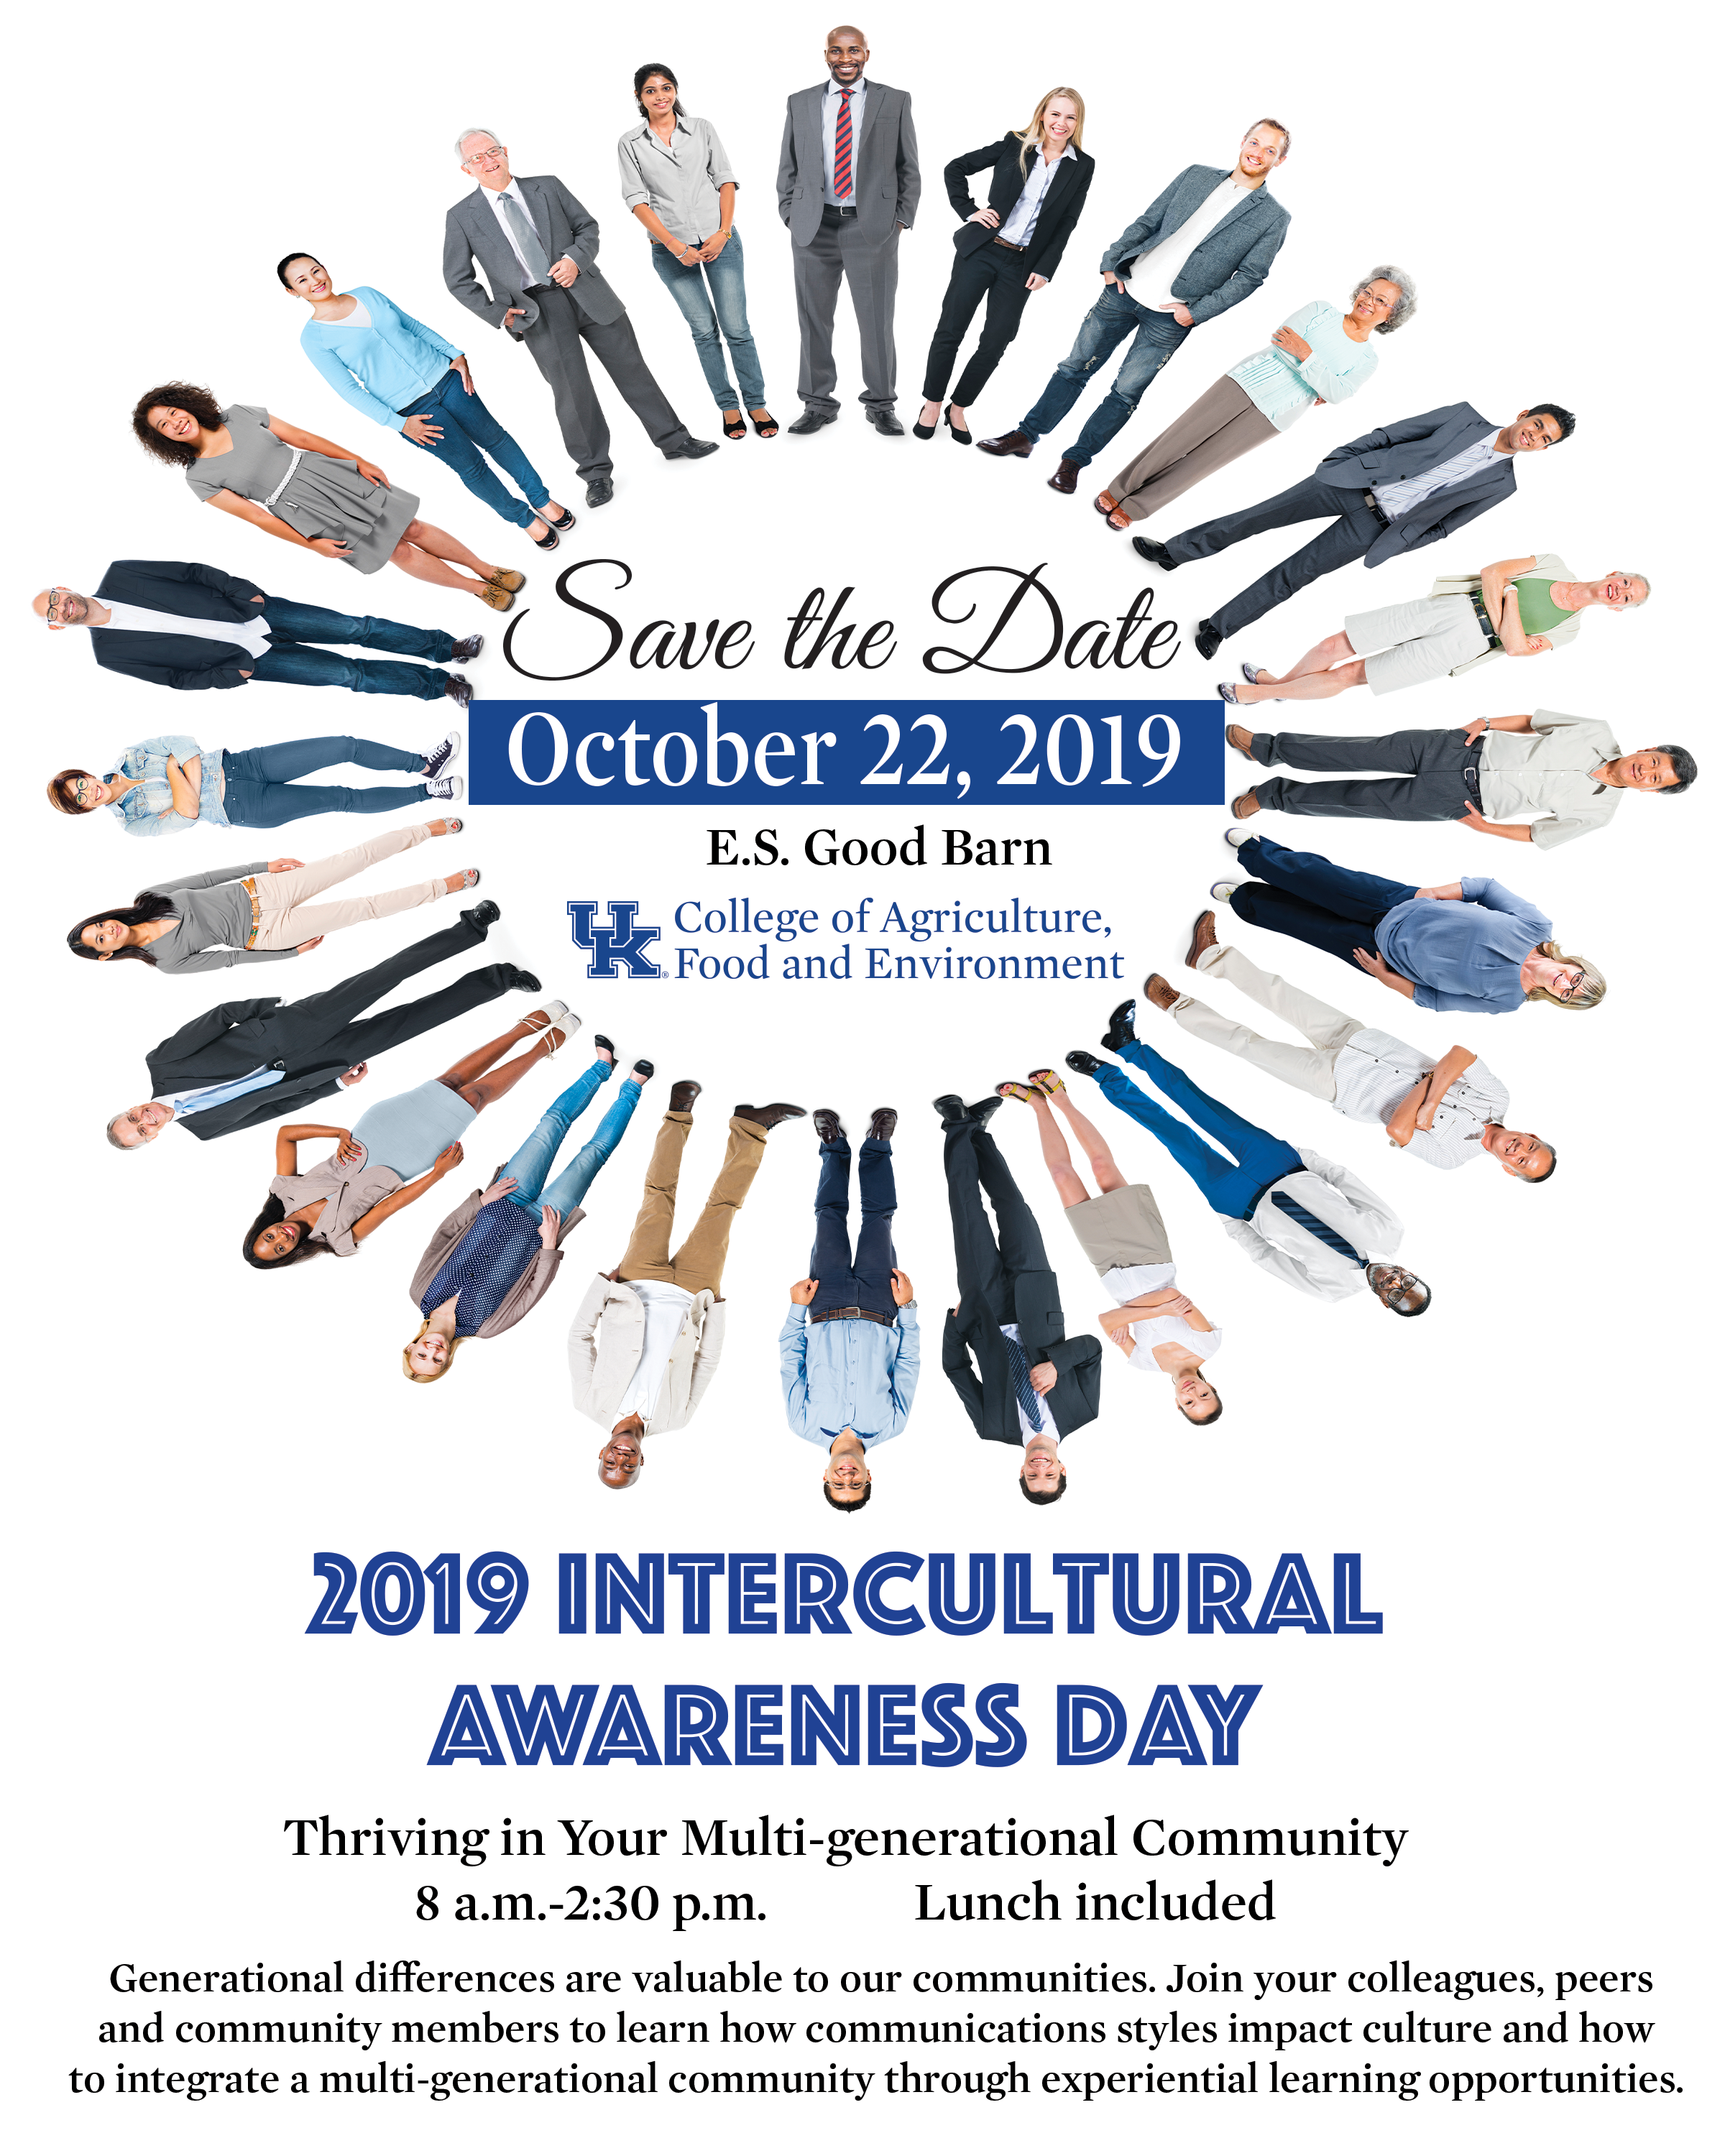 Intercultural Awareness Day (Save the Date Graphic)